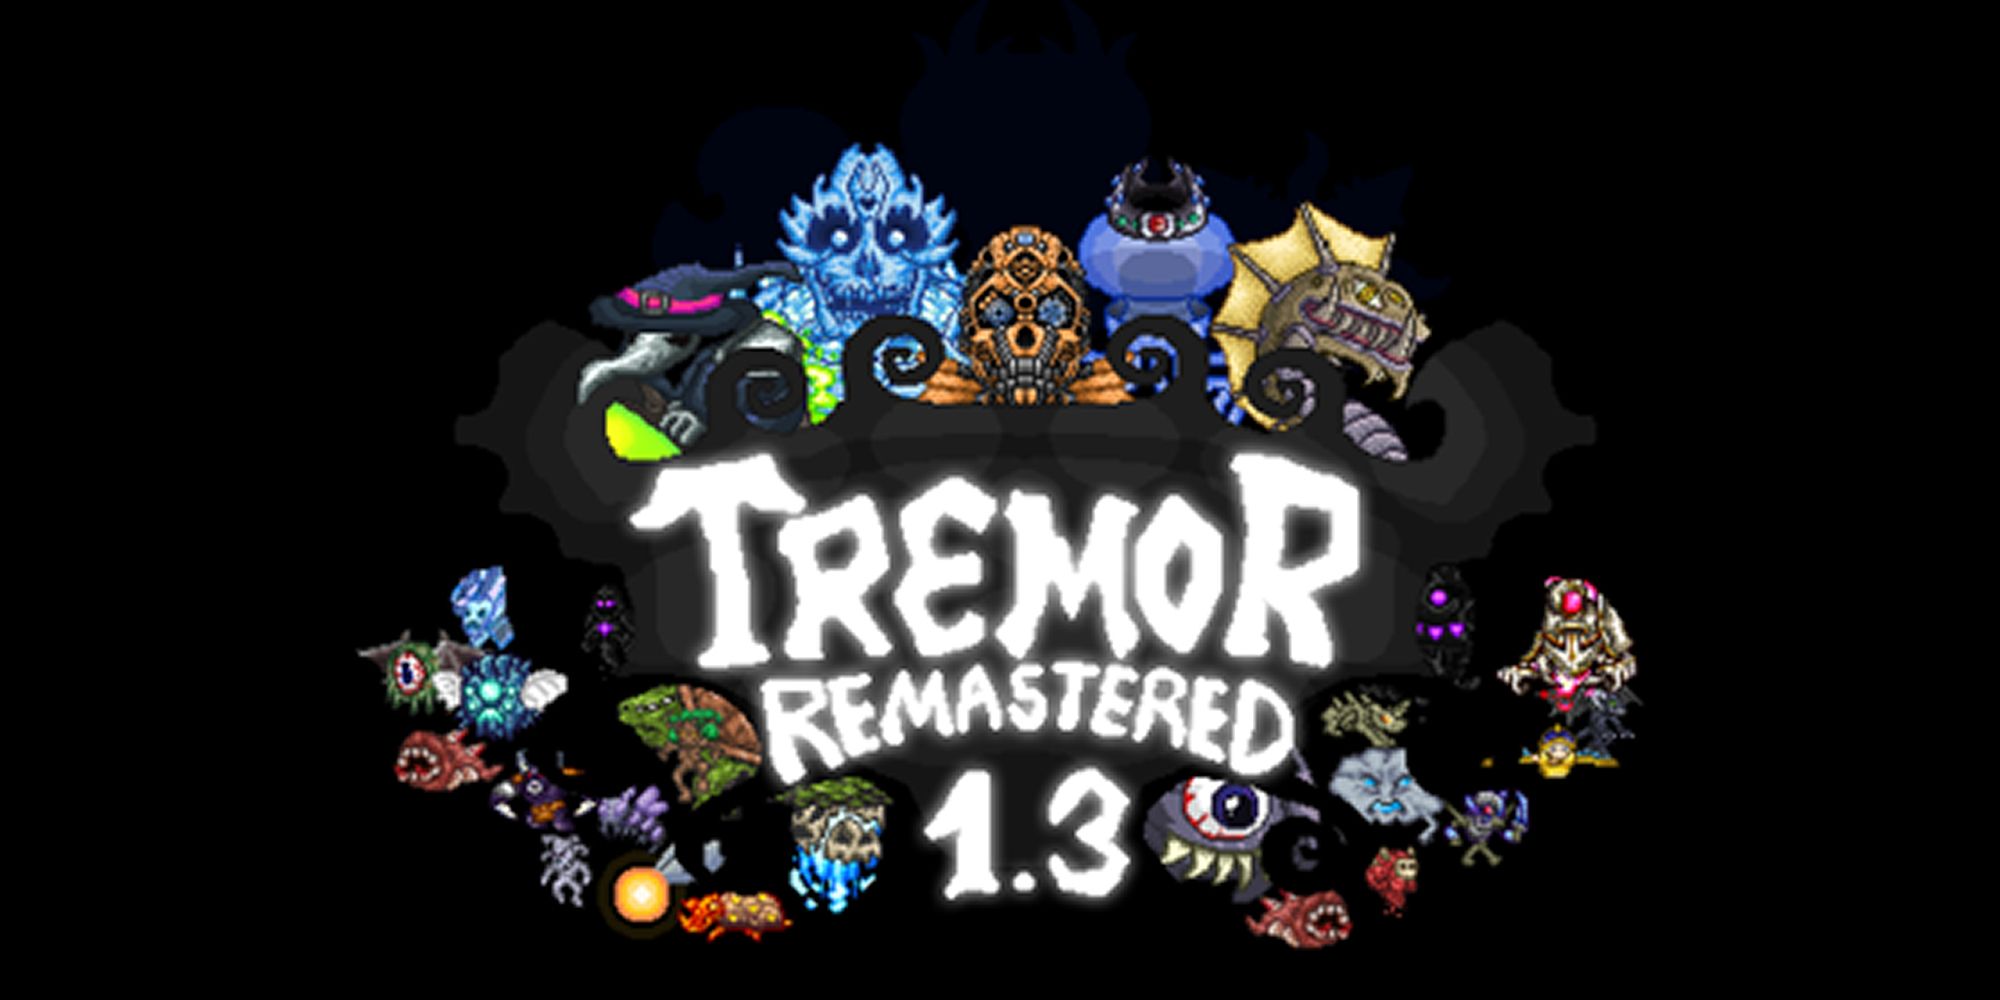 Tremor Mod Title Showcasing All The New Monsters To Fight